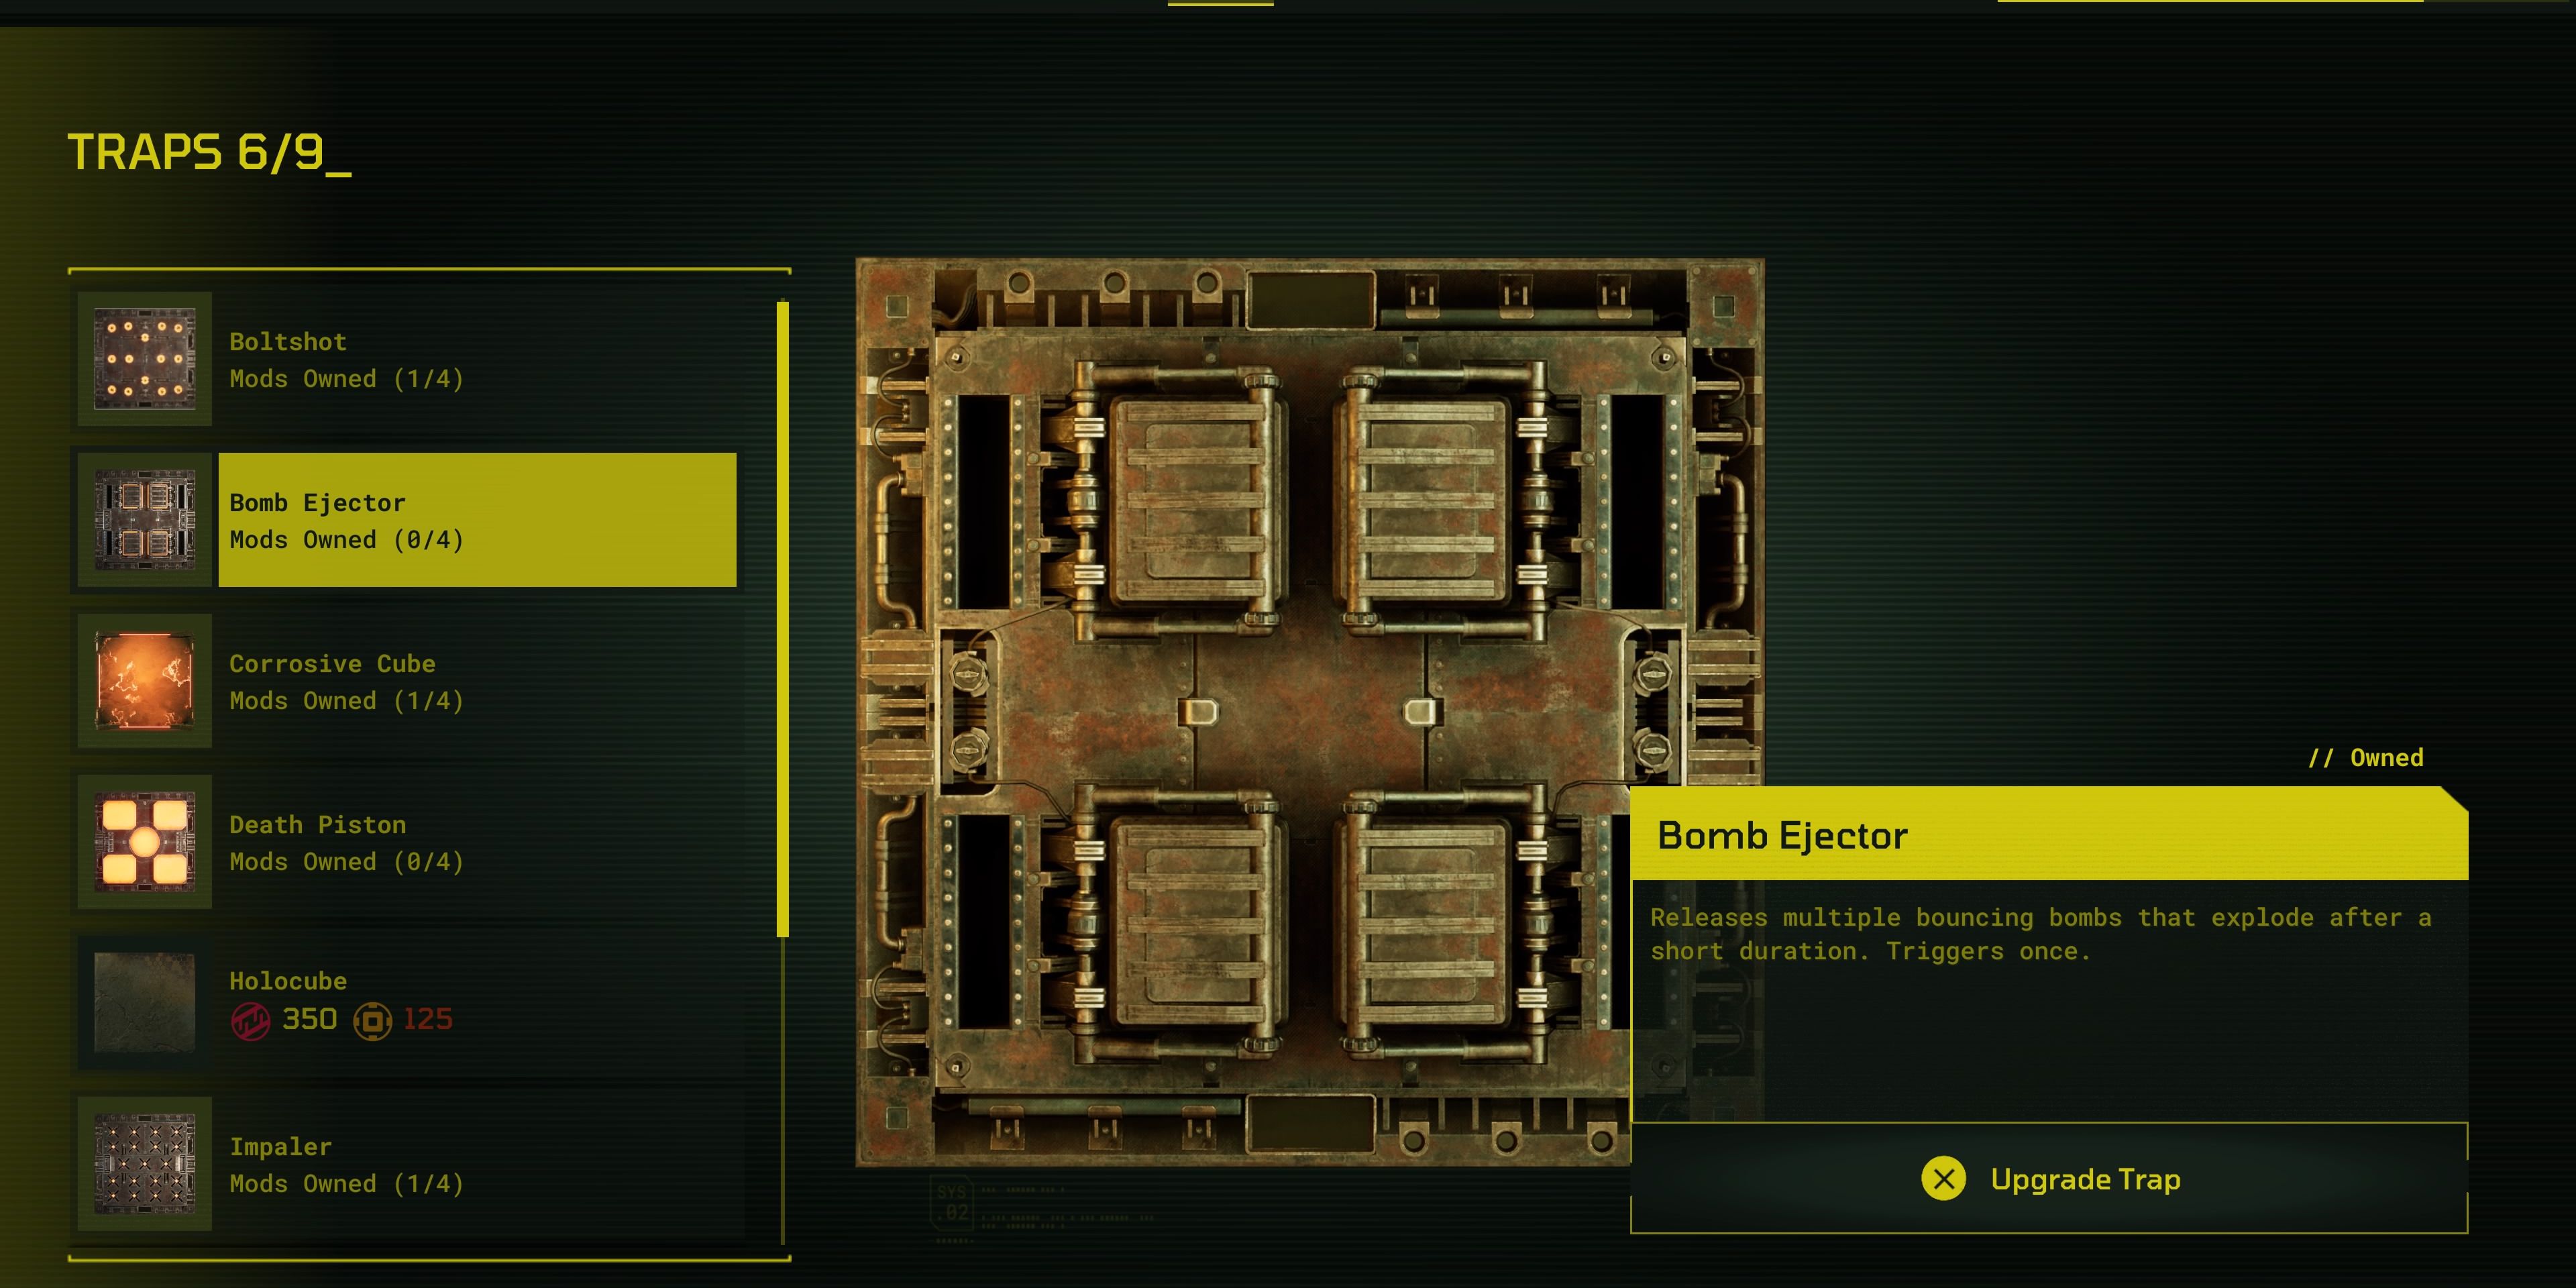 Image shows the Bomb Ejector trap in Meet Your Maker